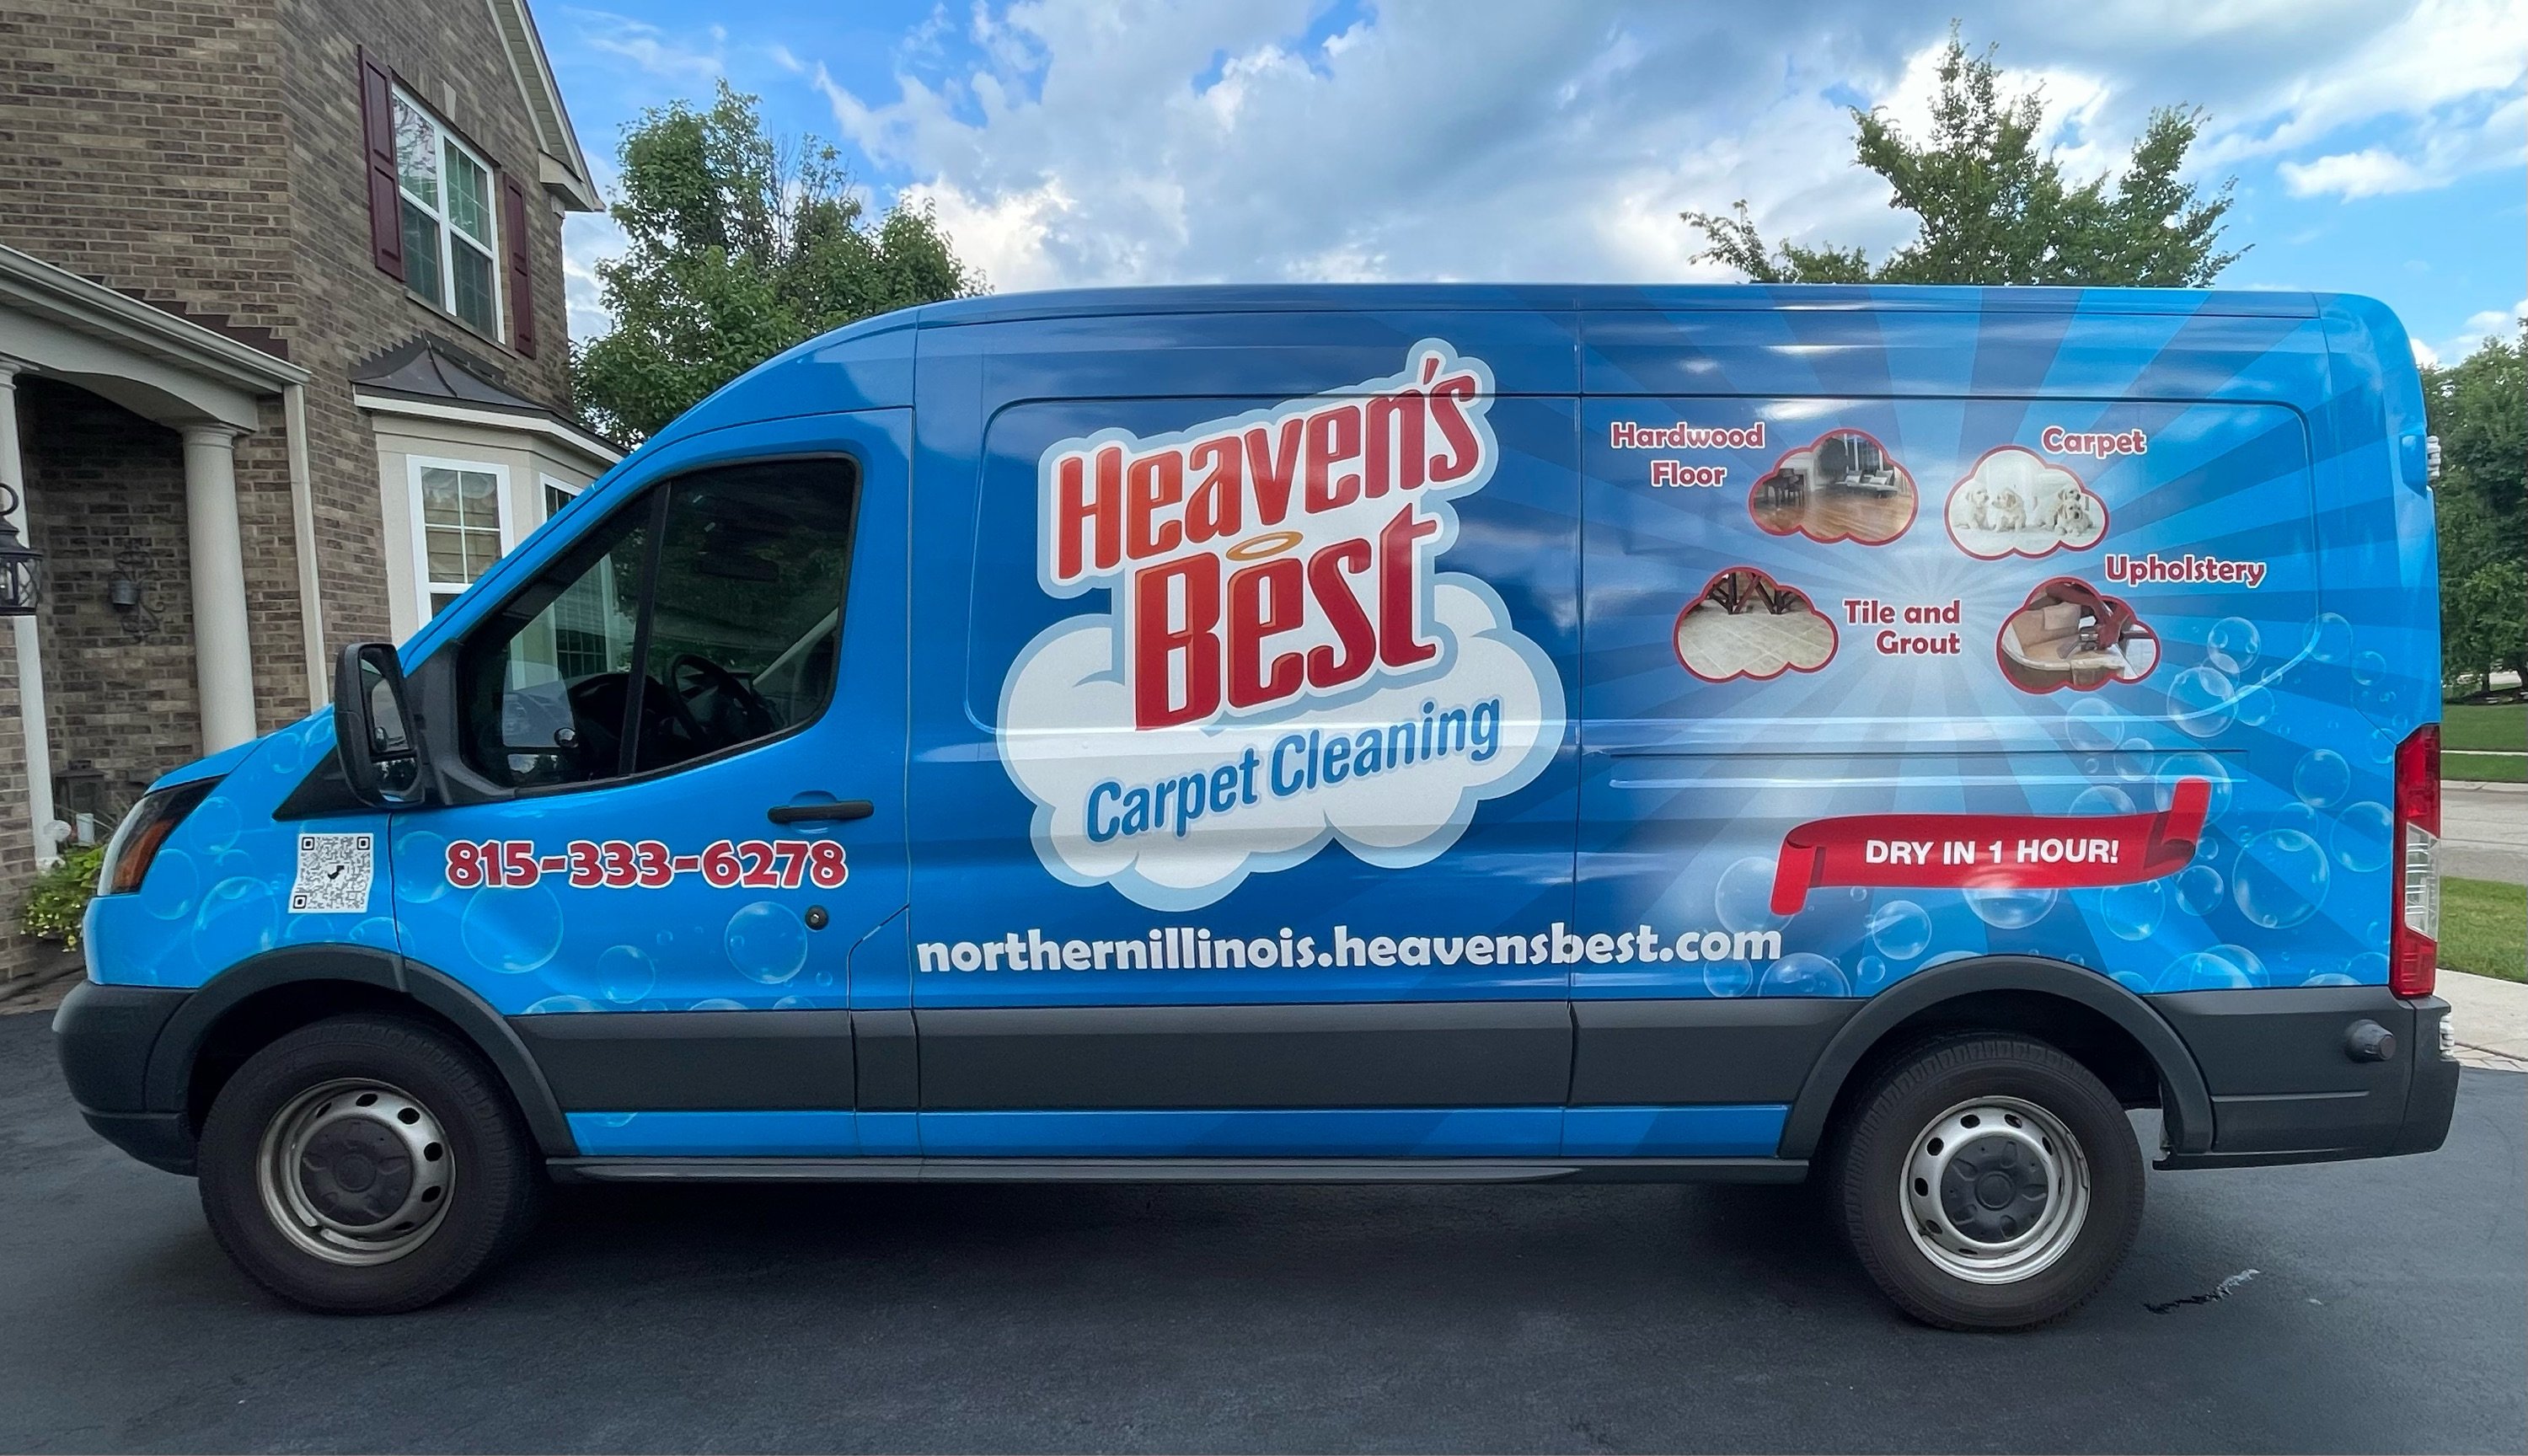 Heaven's Best Carpet Cleaning of Northern Illinois Logo